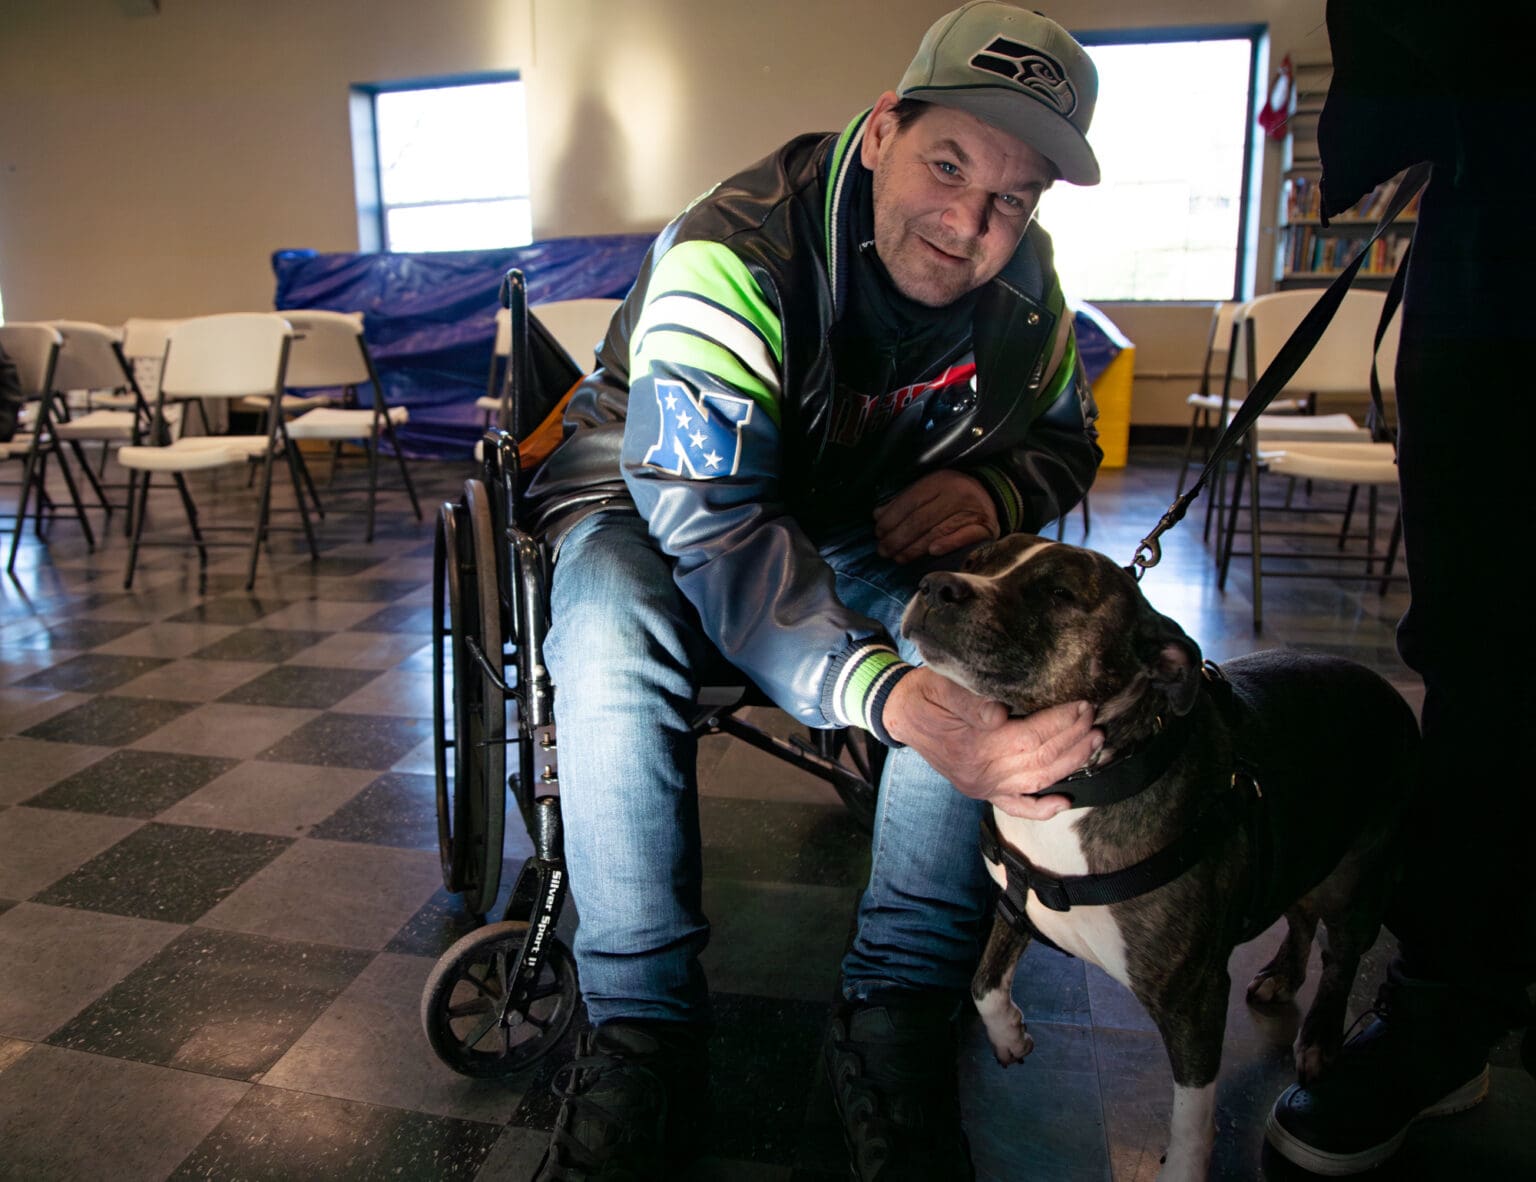 Martin pets Aja while at the warming shelter hosted by the City of Bellingham on Friday